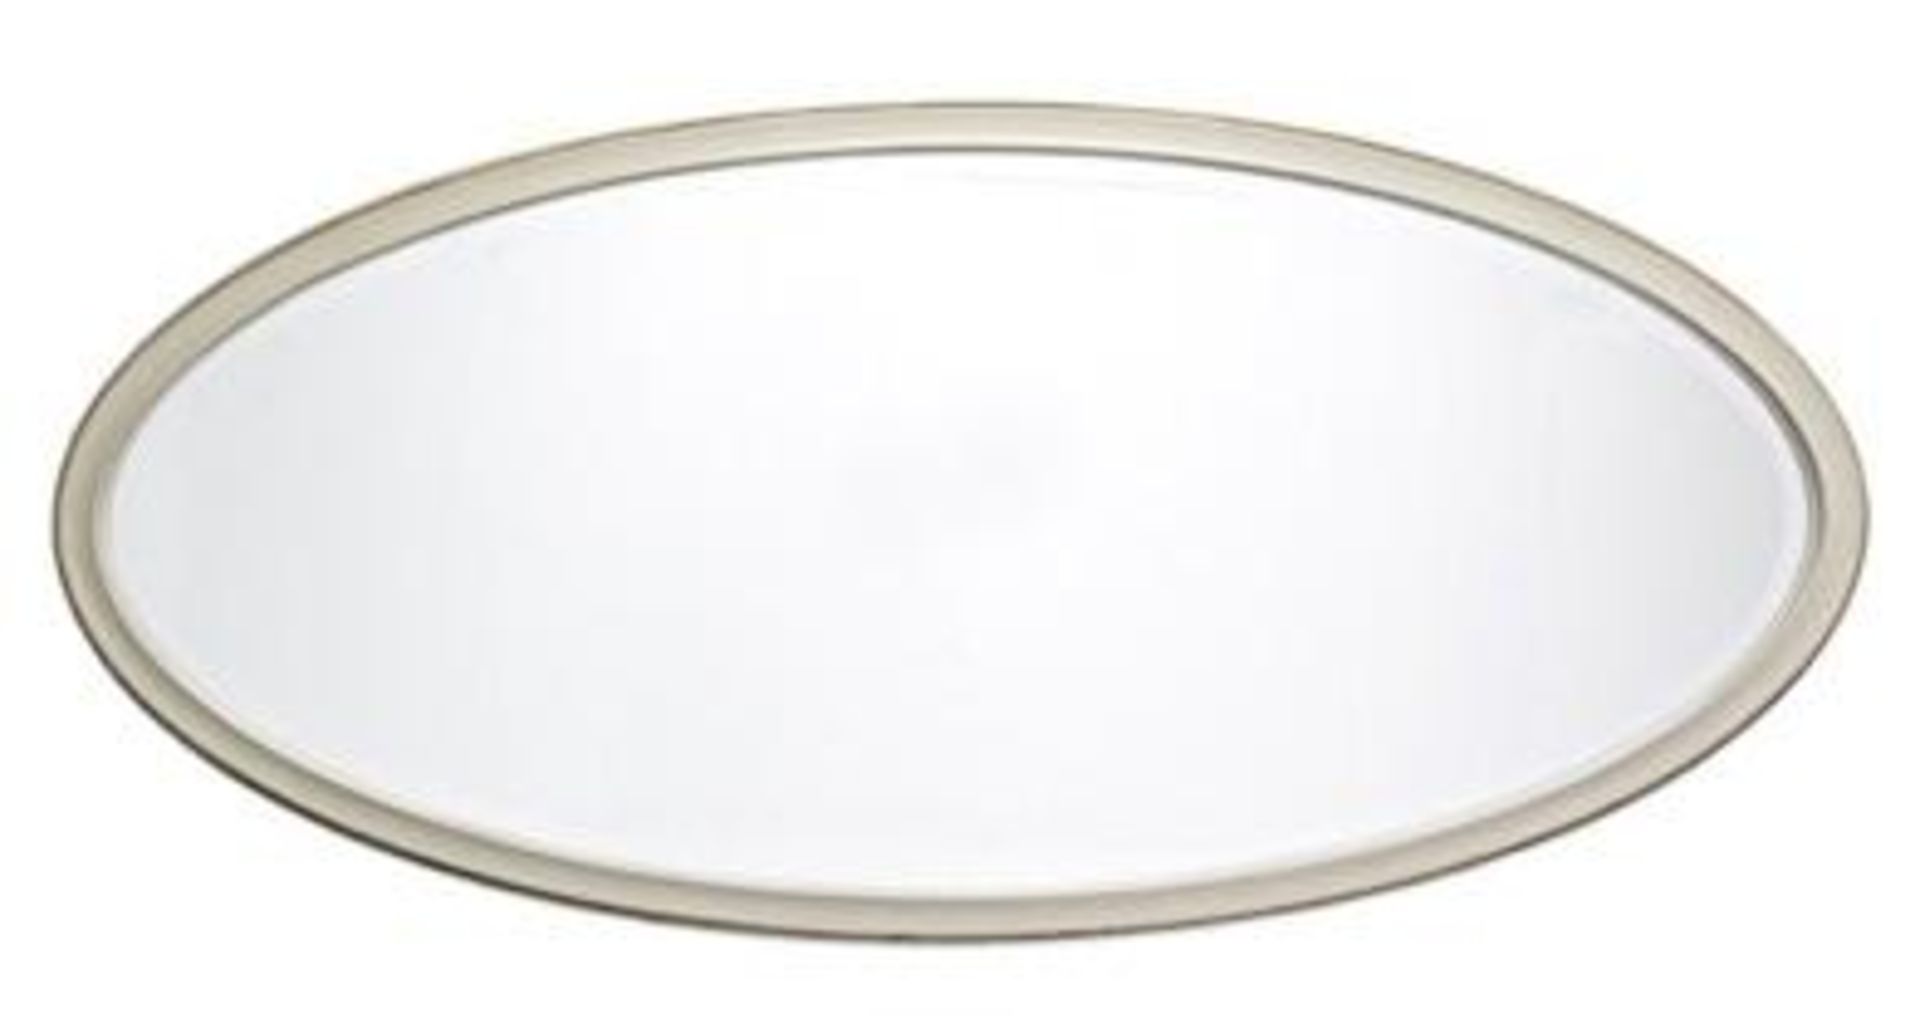 1 x BARBARA BARRY 'Horizon' Designer Oval Mirror With An Ivory Frame - Made In America - Dimensions: - Image 2 of 7